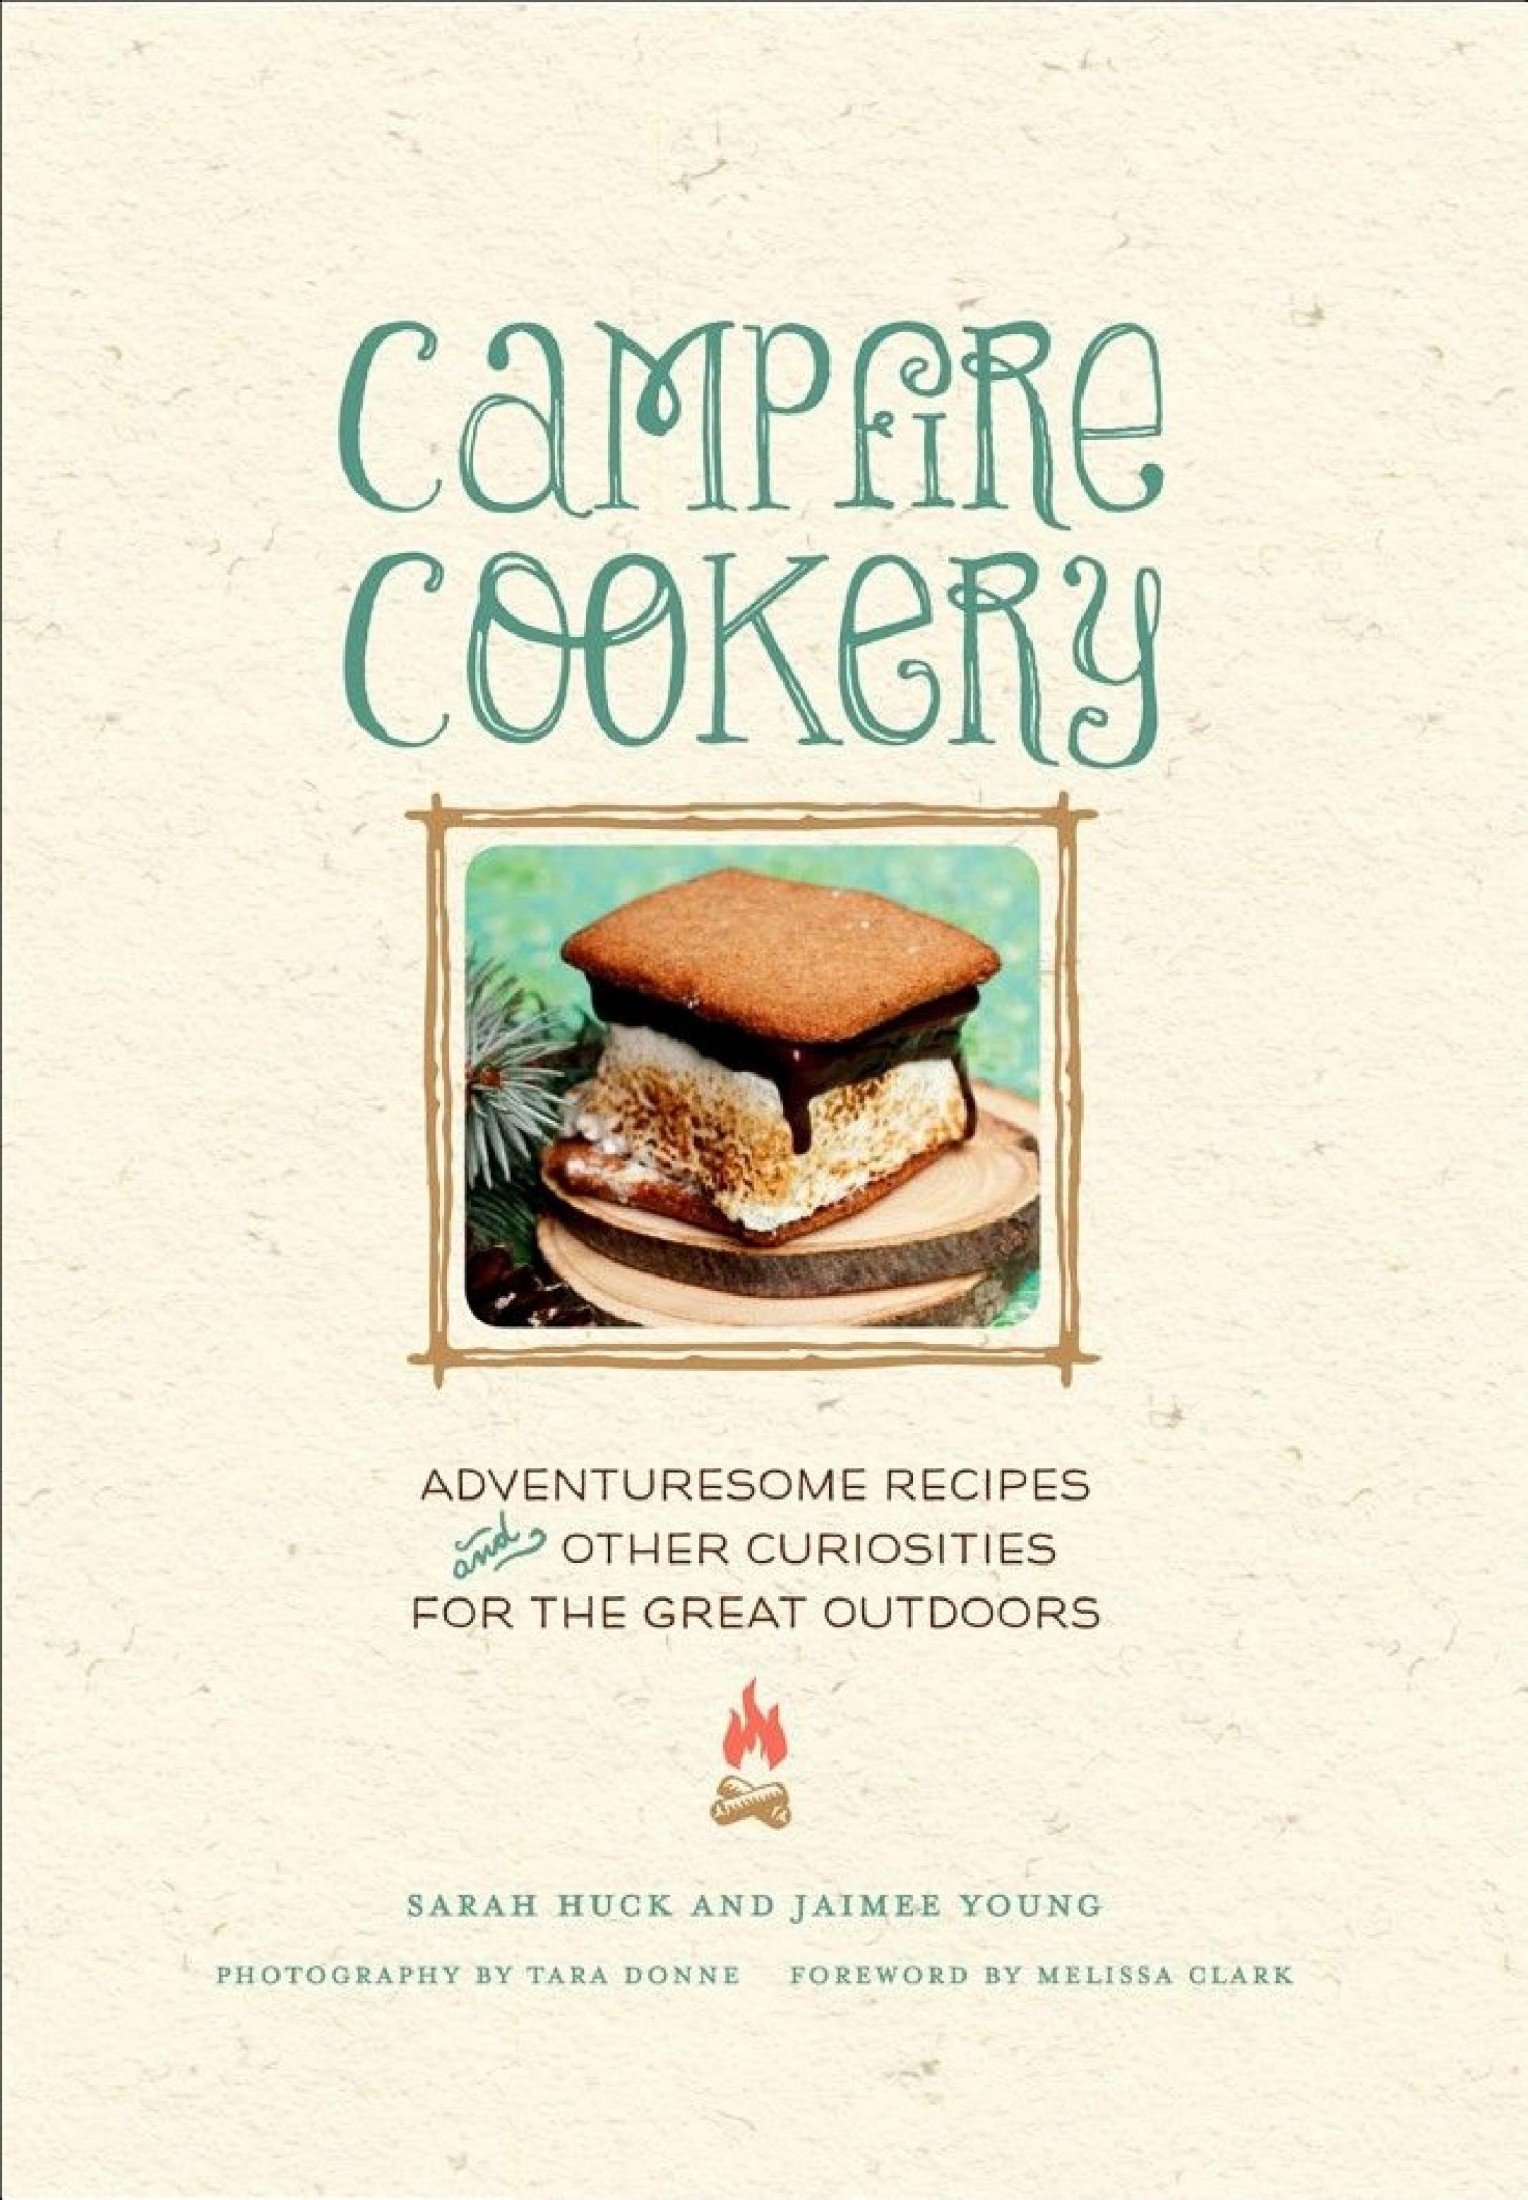 Campfire Cookery